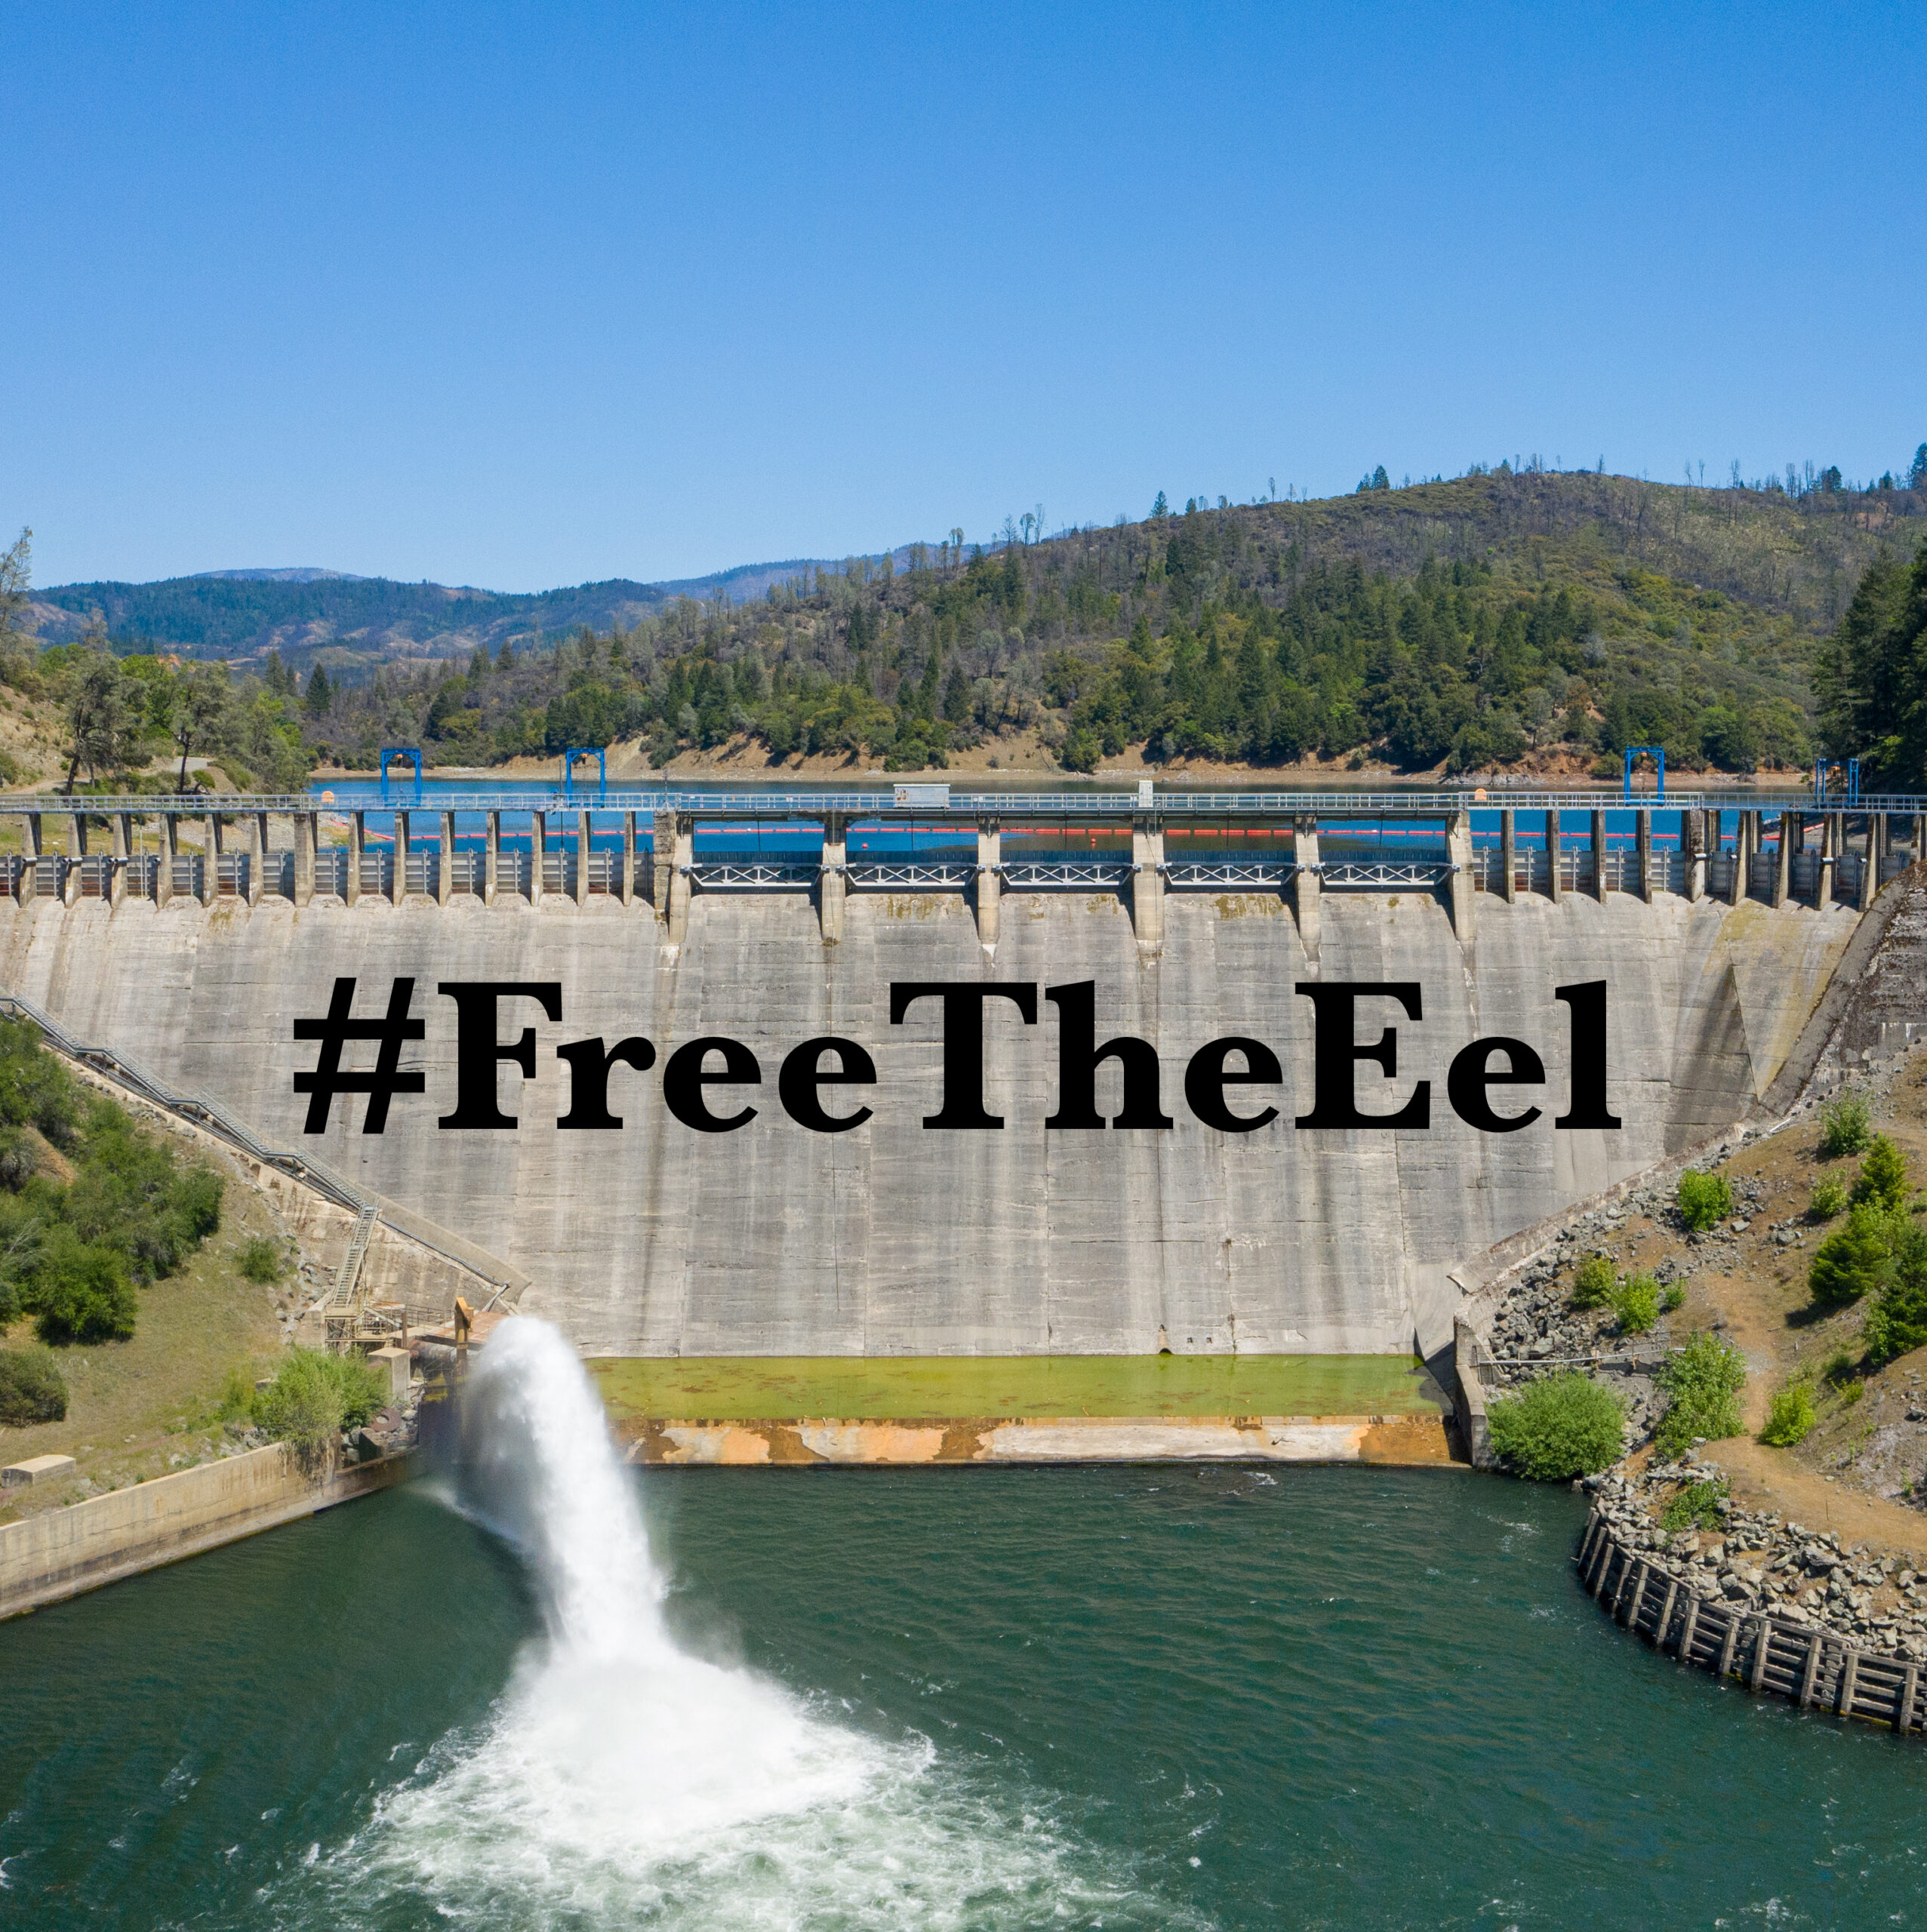 Conservation and Fishing Groups File Lawsuit in Federal Court Over Endangered Species Act Violations at Eel River Dams